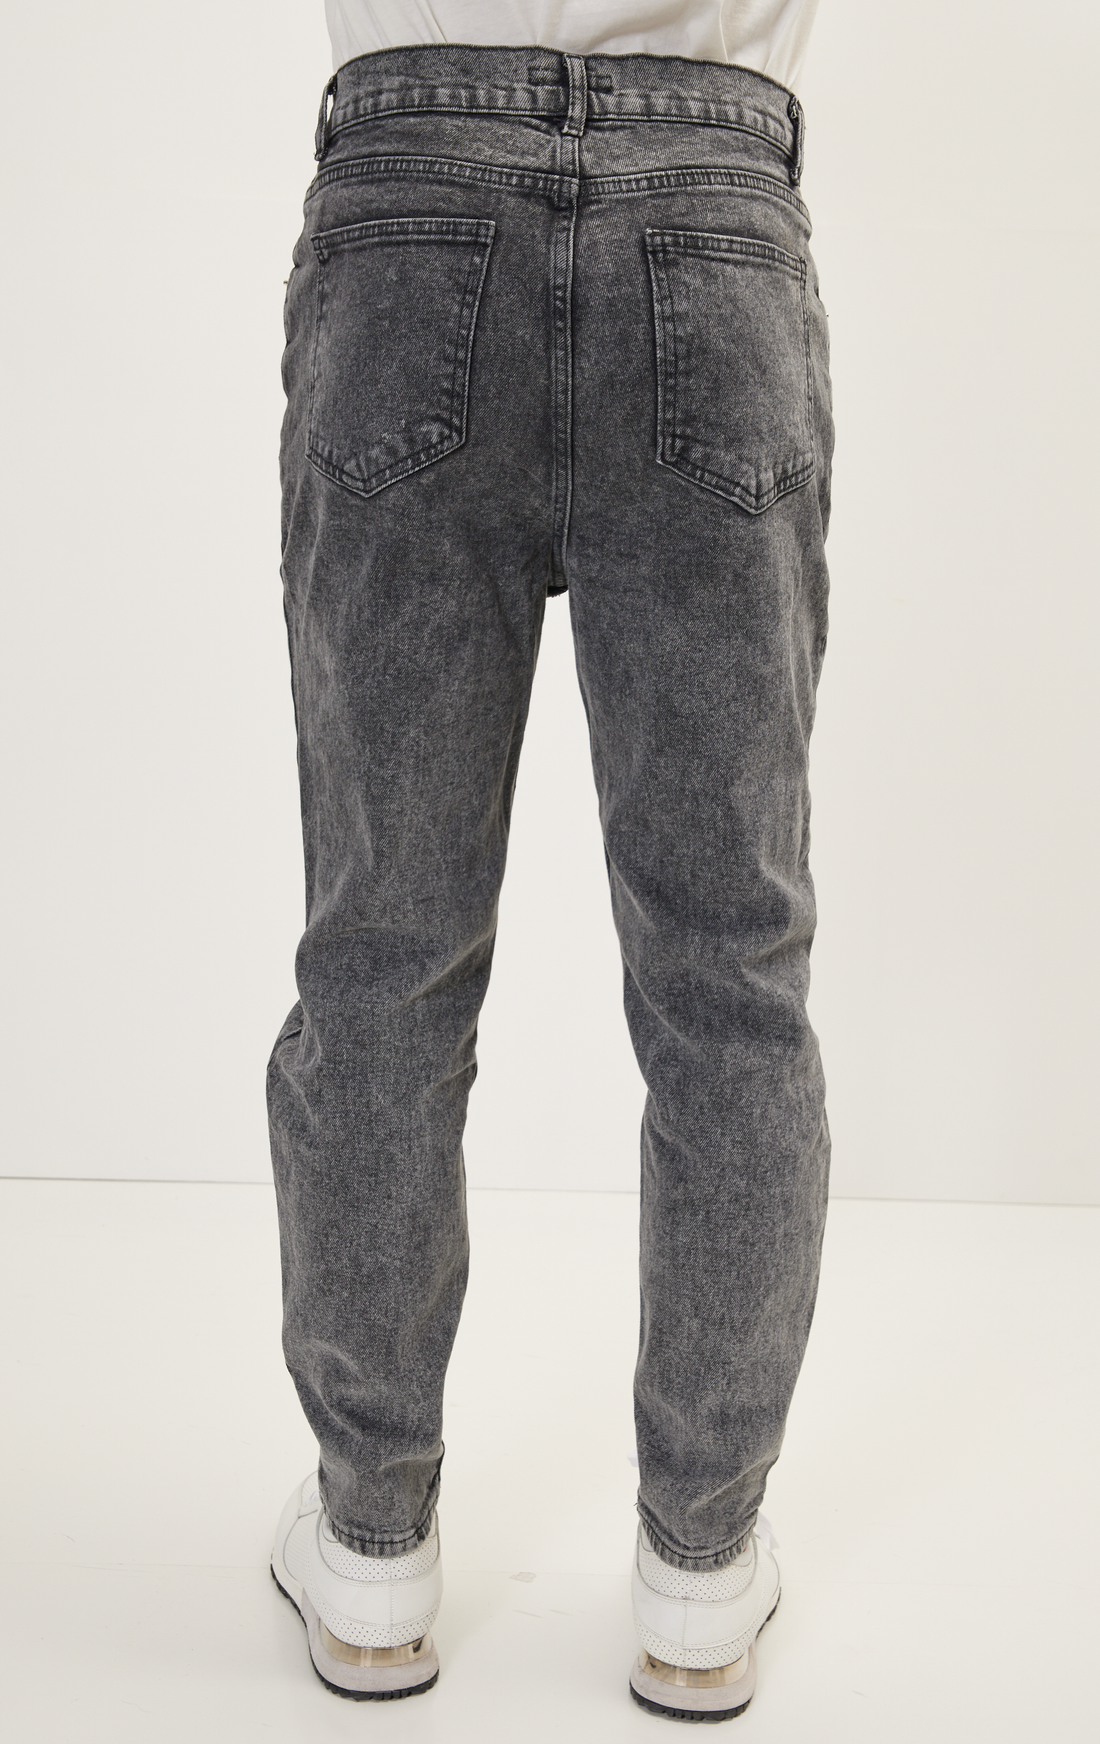 N° 1642 JEANS RELAXED FIT TAPERED - NERO